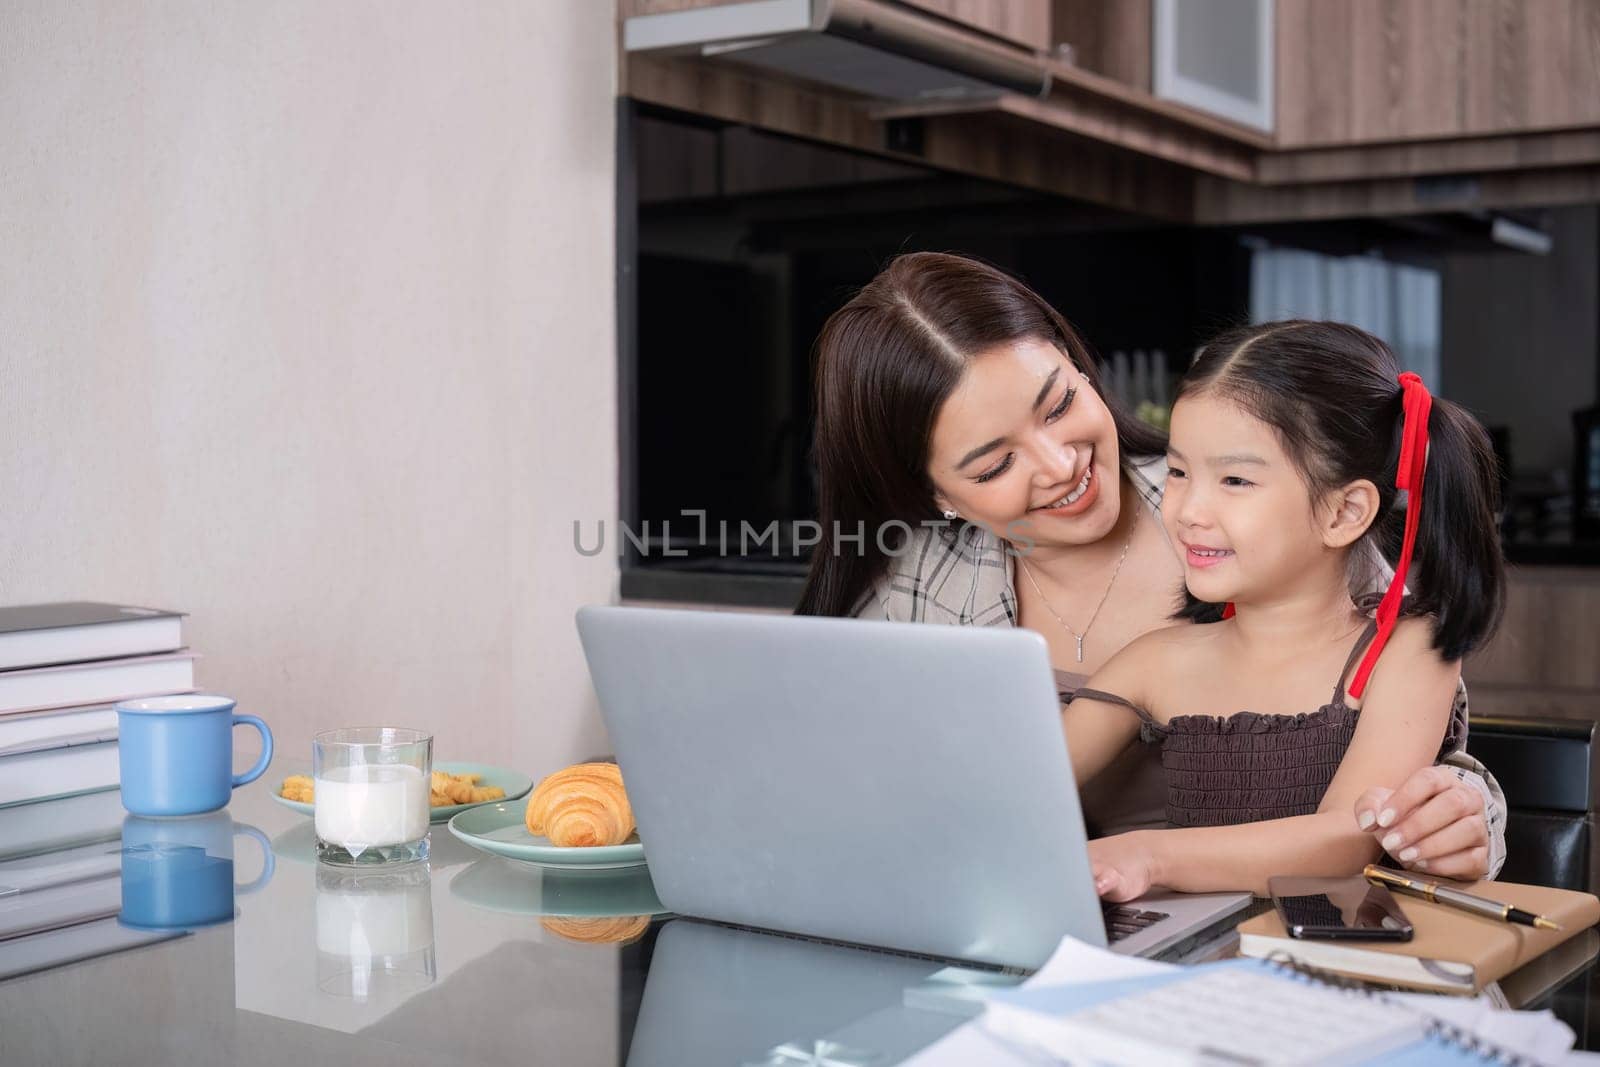 a single mother, sits at home working on a laptop with her daughter beside her watching and encouraging her..